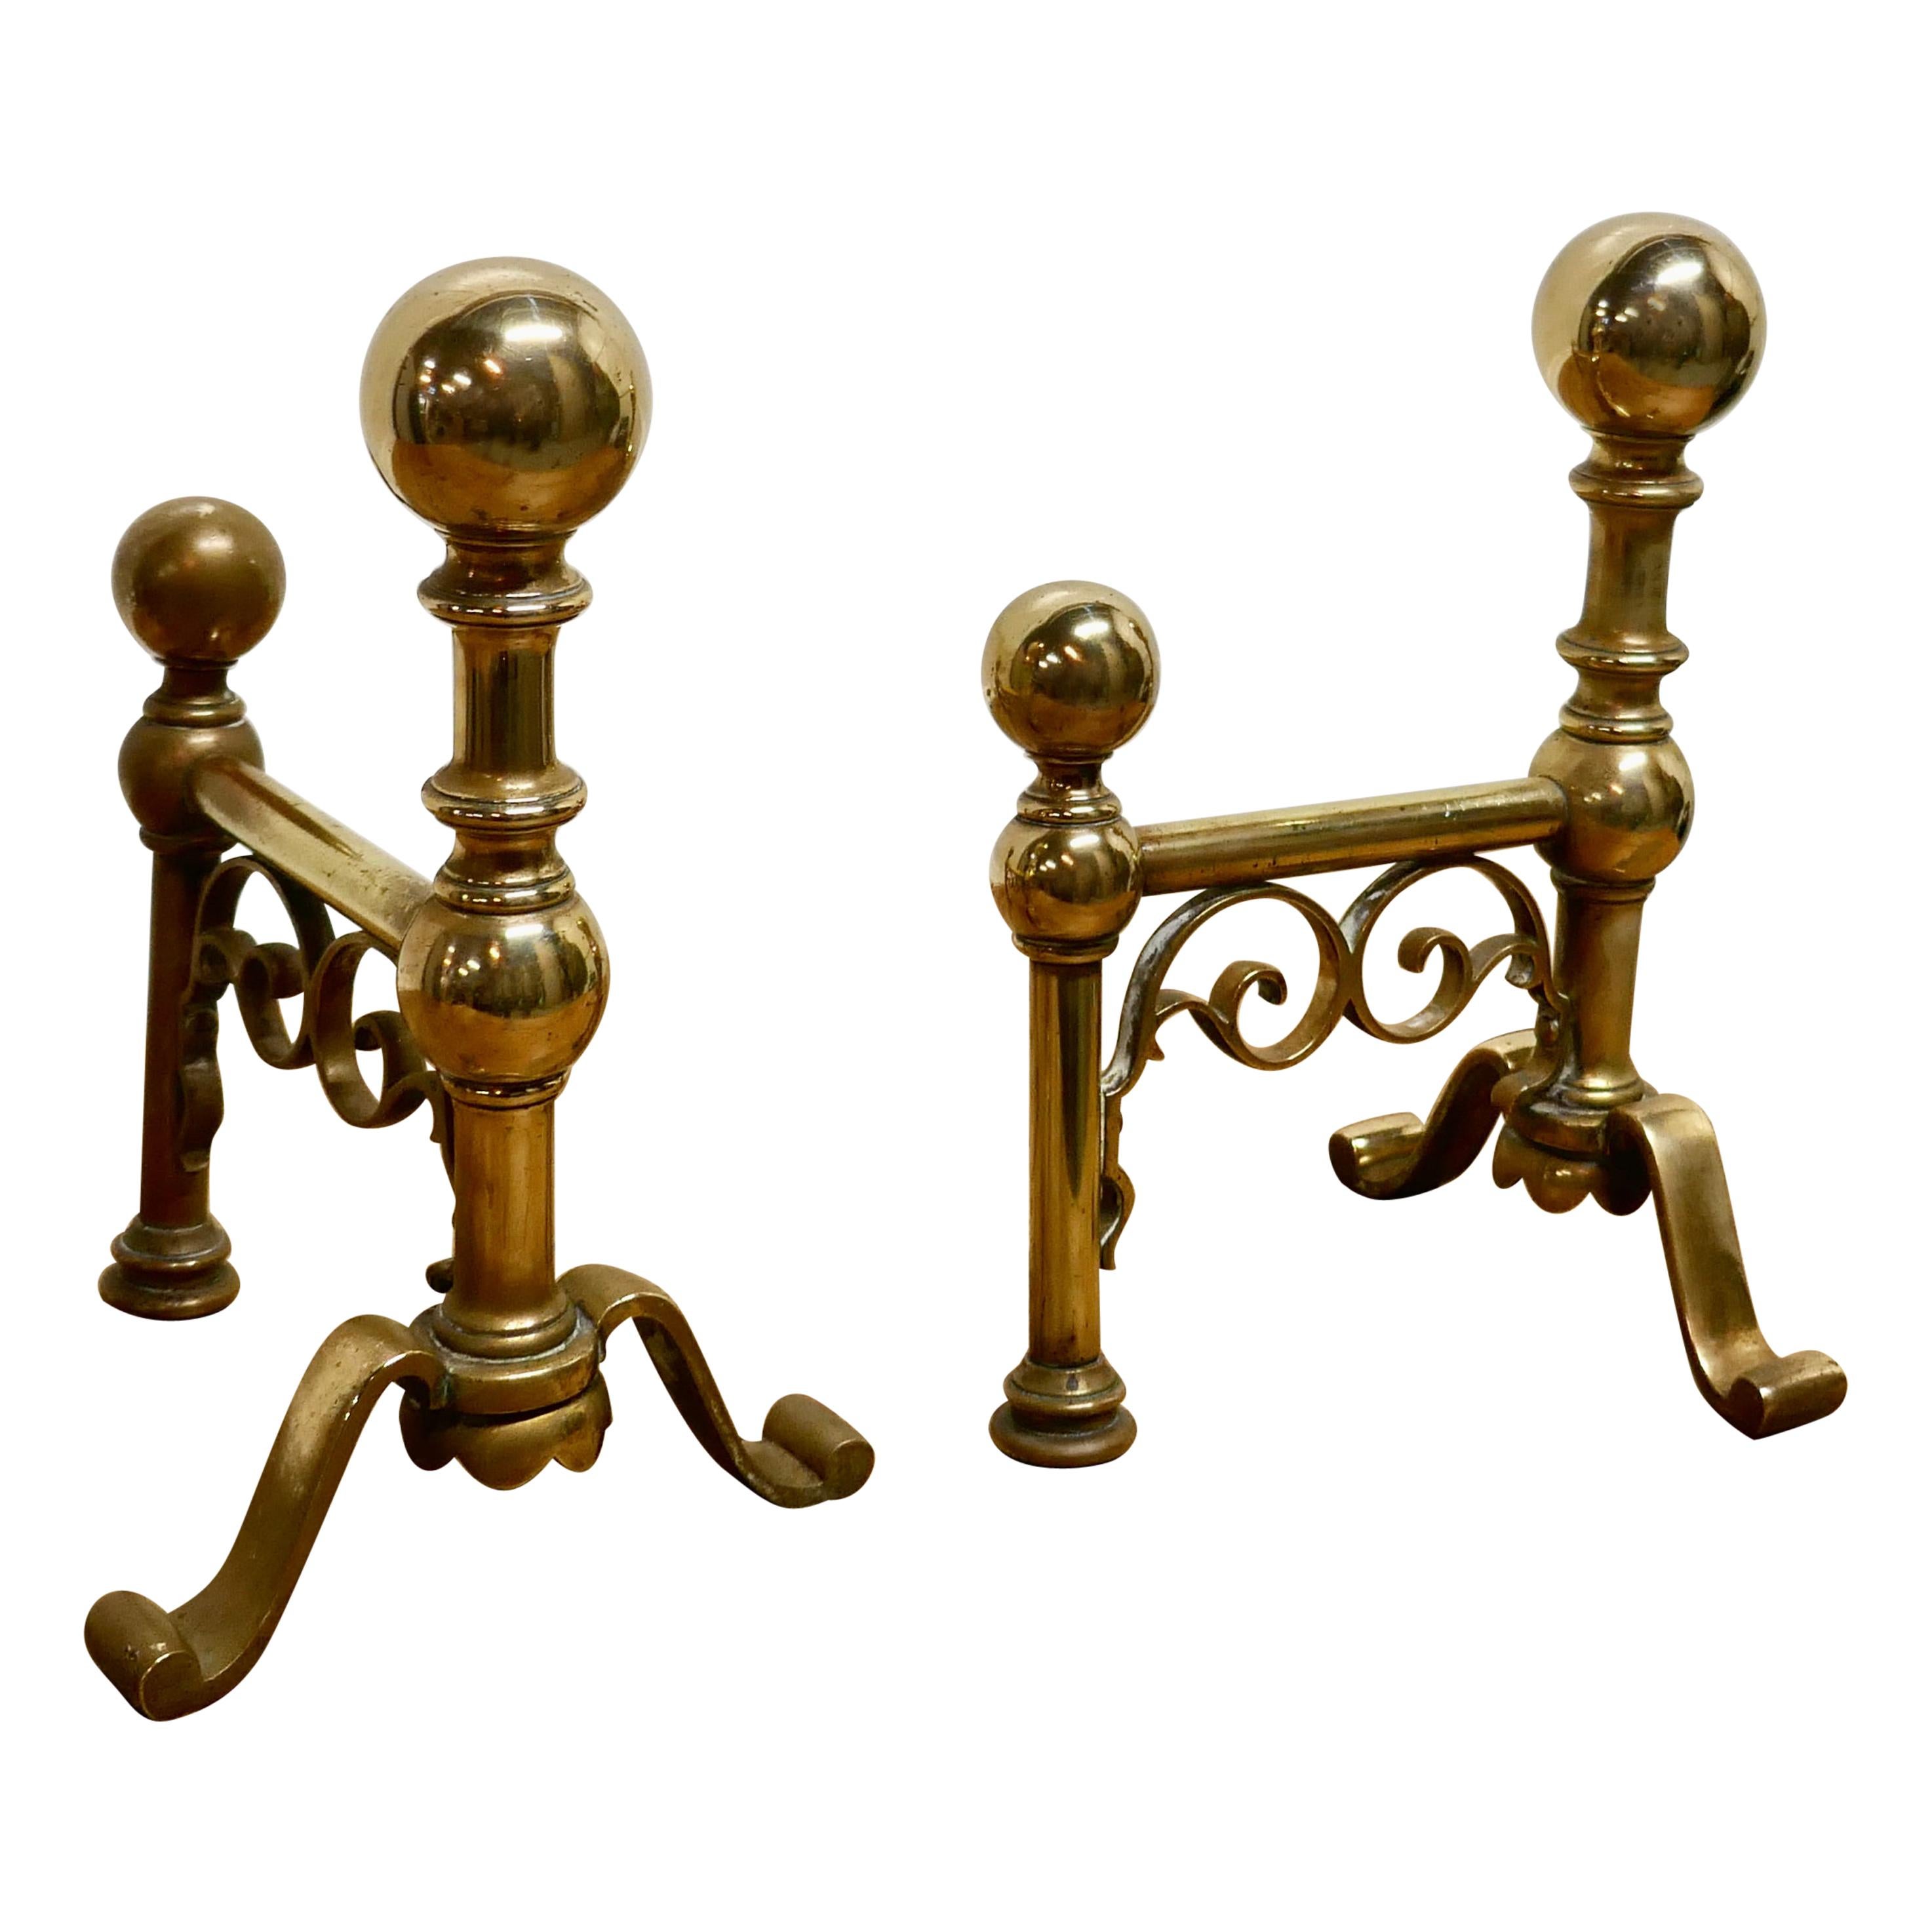 Very Attractive Pair of Brass Andirons